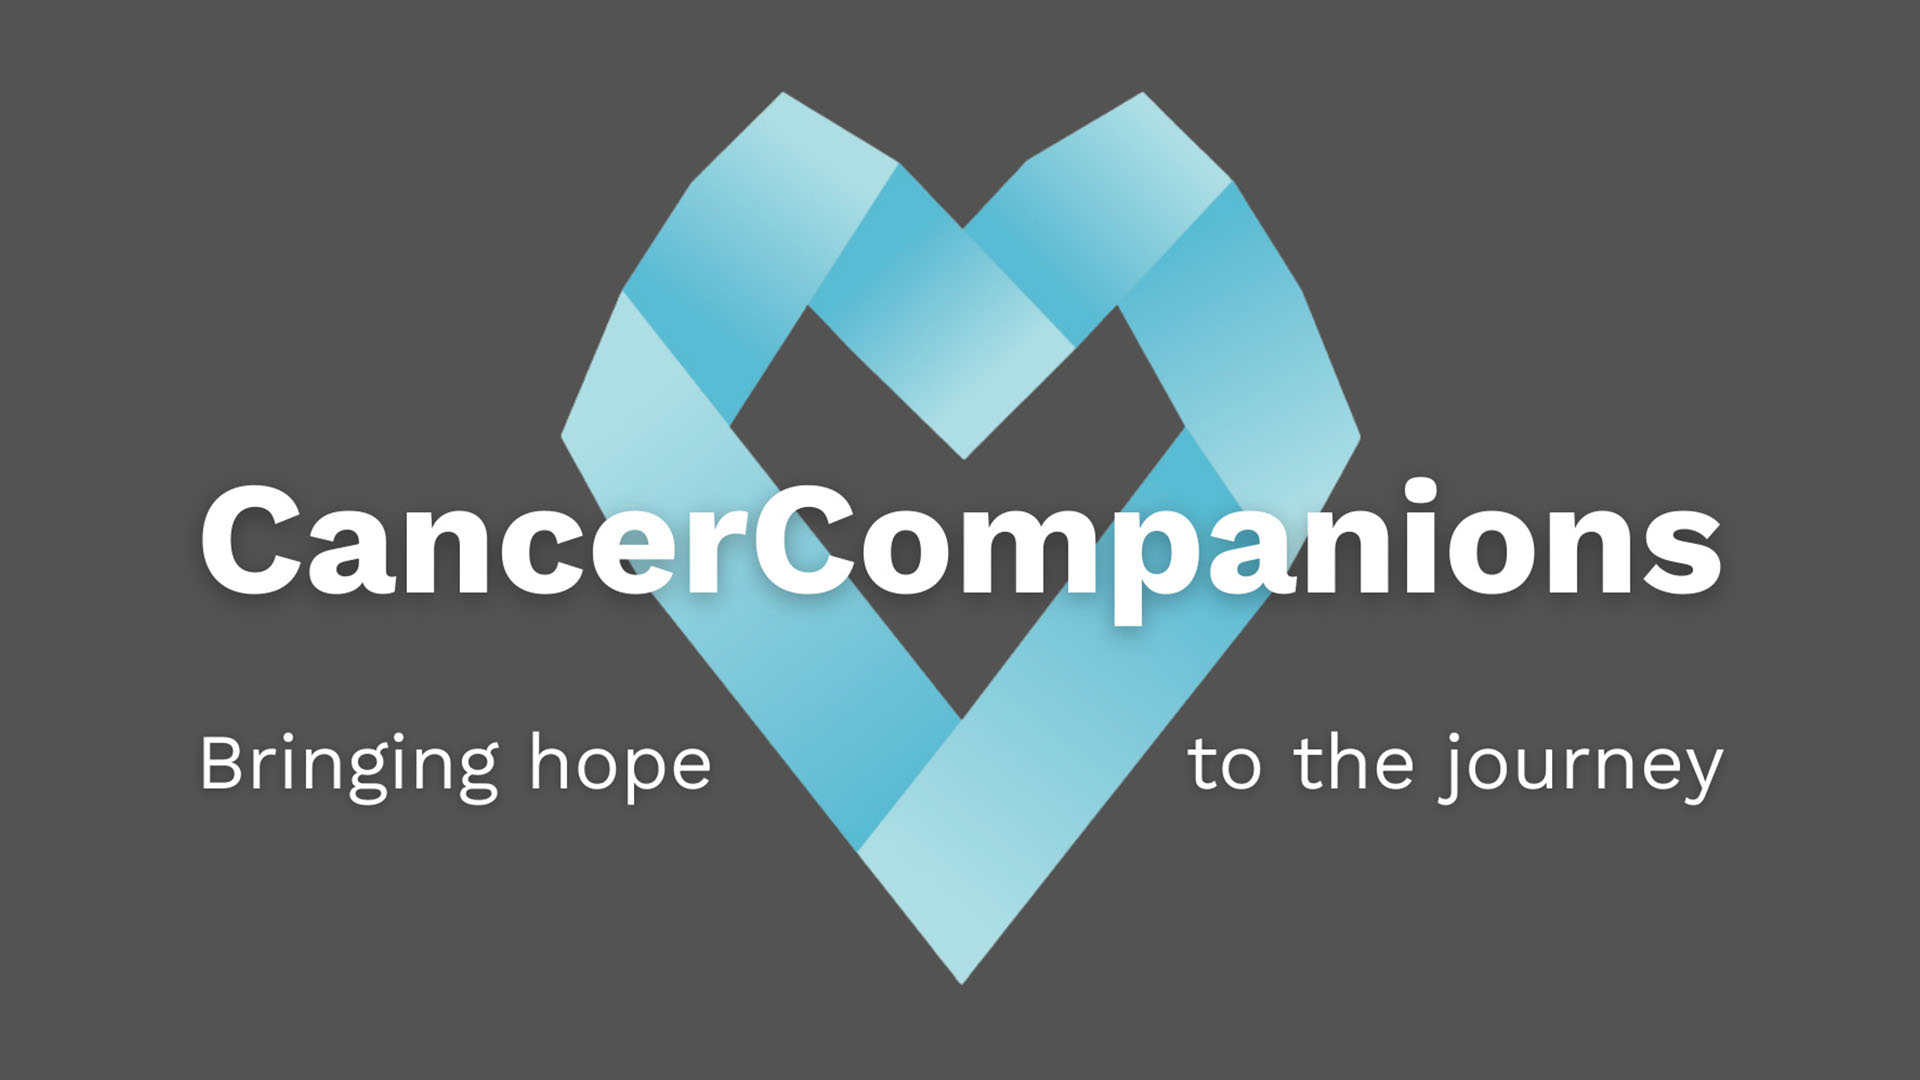 Cancer Companions

9-Week Series
Thursdays | 6:30-8:30pm
February 2 - March 30
